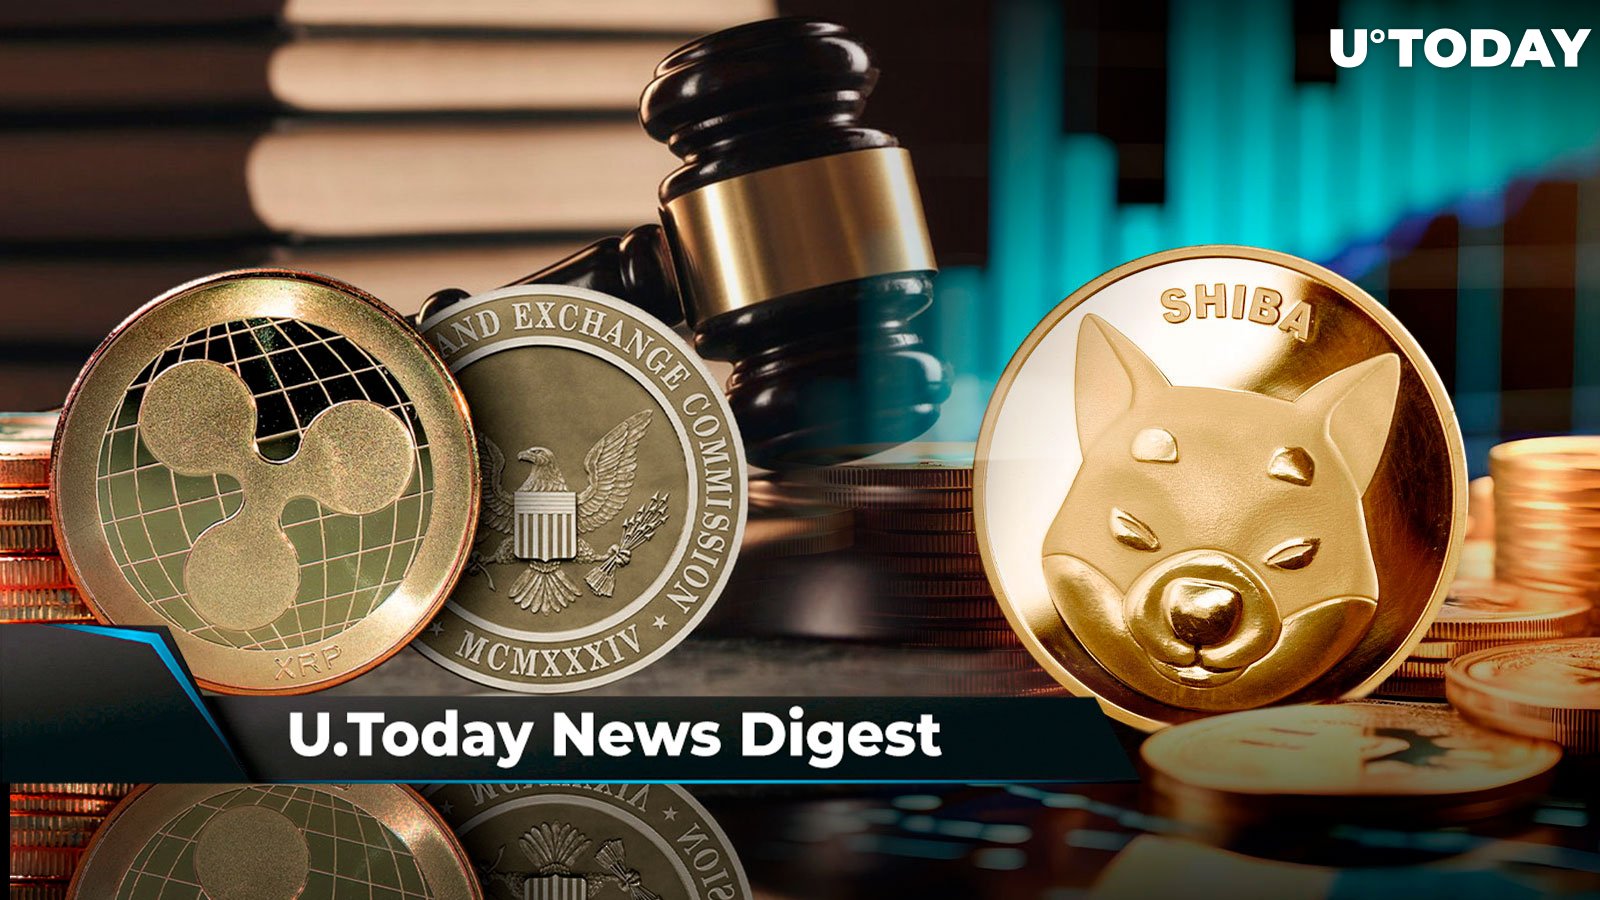 Ripple and SEC Jointly Agree to Seal Details in Remedy Briefing, Team Member Shiba Inu Expects New SHIB ATH Before BTC Halving: U.Today's Crypto News Digest